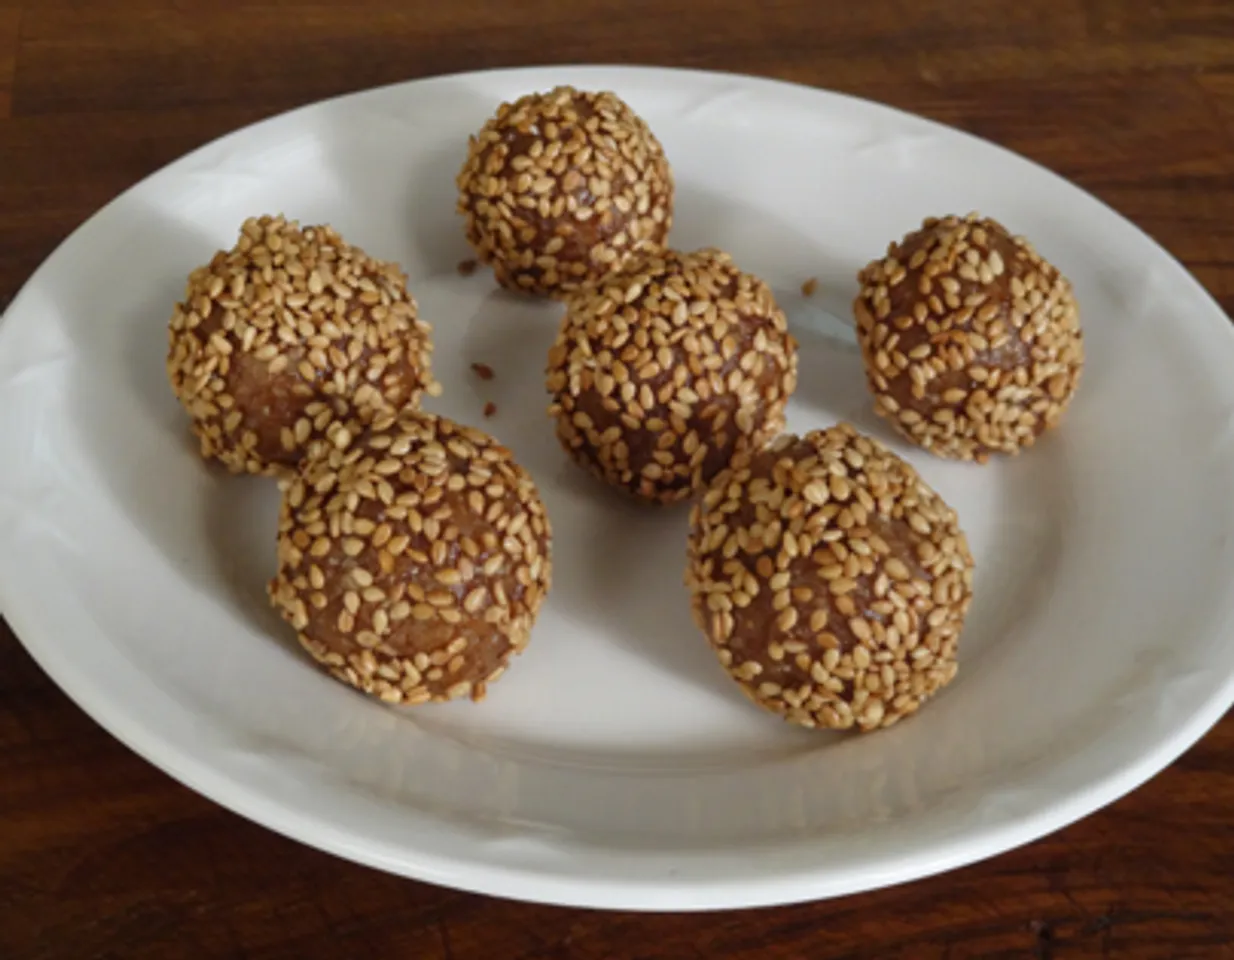 Til and Dry Fruits Laddoo